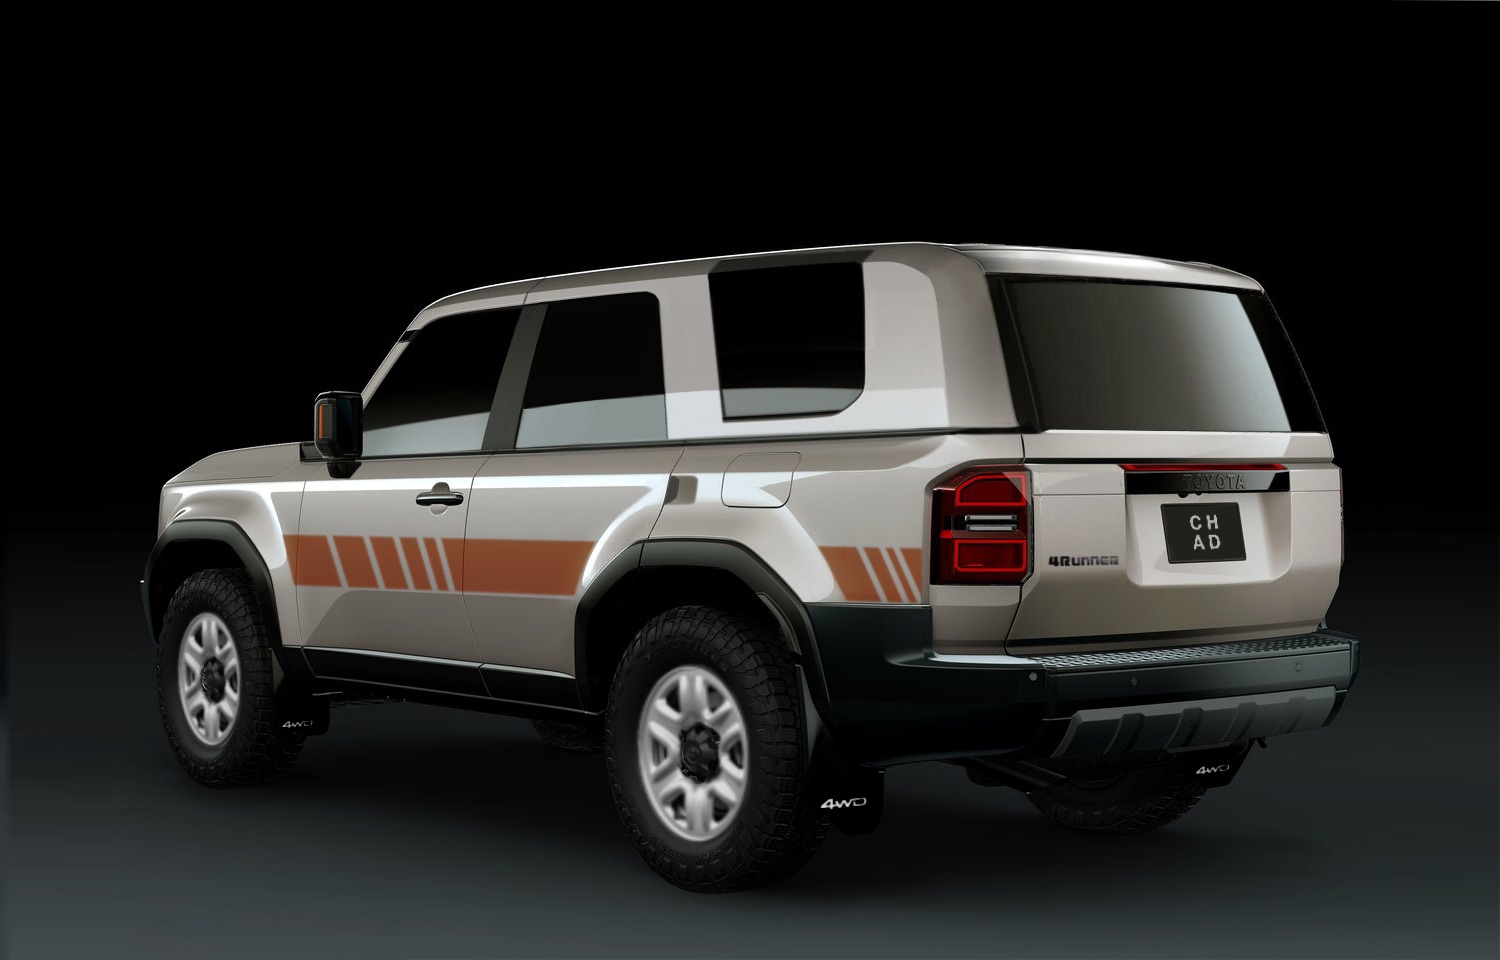 2025 Toyota 4runner Rendered: Topless 2025 4Runner based on the LC250. D9D07360-F603-49F0-B361-F31AD23C2986